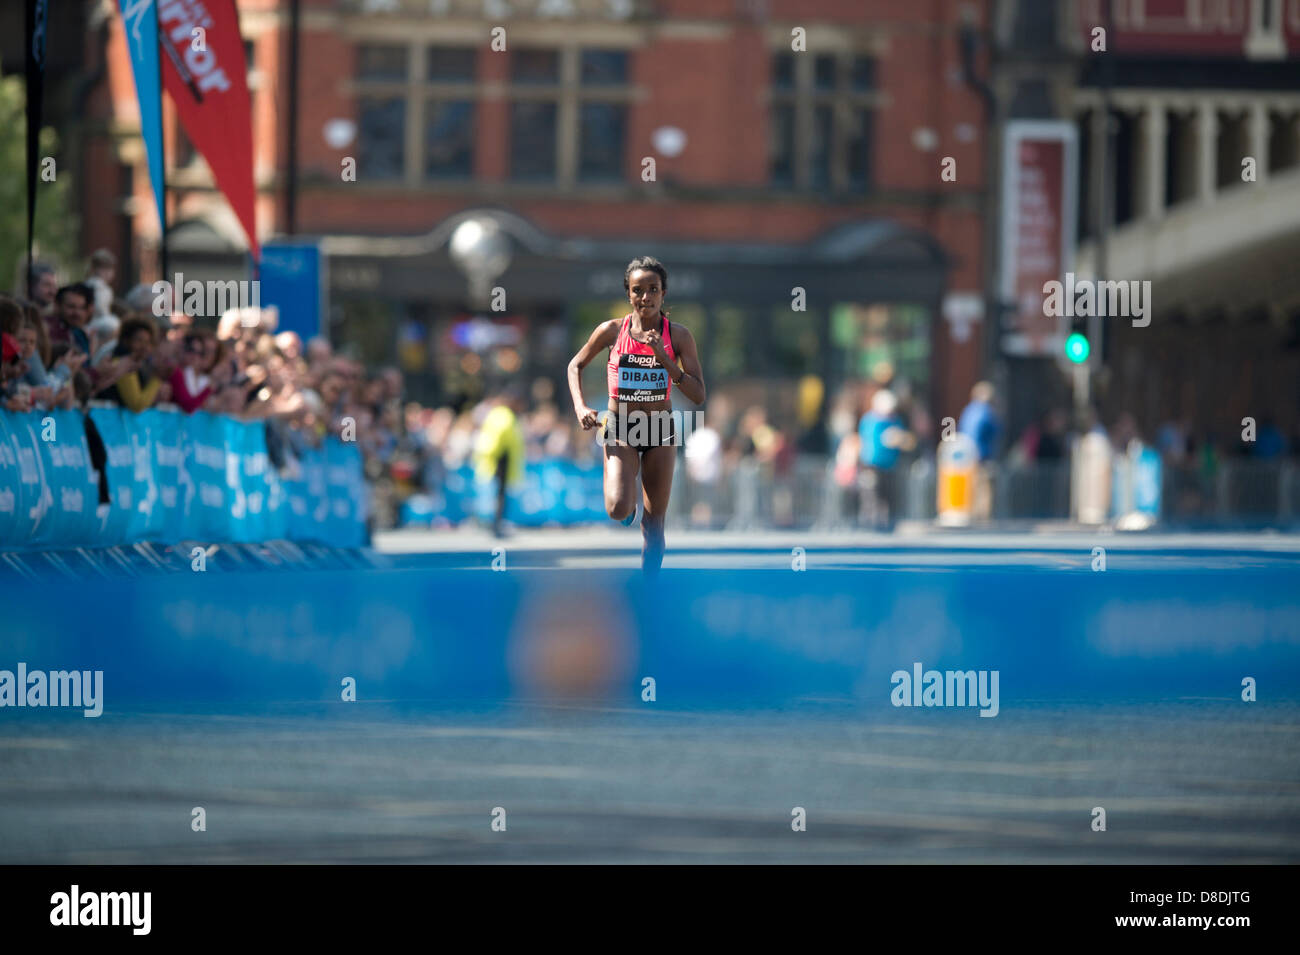 MANCHESTER, UK. 26th May 2013. Distance runner Tirunesh Dibaba of Ethiopia sprints alone towards the finish line of the 2013 Bupa Great Manchester Run to claim Womens 1st place in a time of 30mins 49secs in the 10km road event. The current 10,000m Olympic champion beat Latvia's Jeļena Prokopčuka into 2nd place by over a minute and a half. Credit: News Shots North/Alamy Live News (Editorial use only). Stock Photo